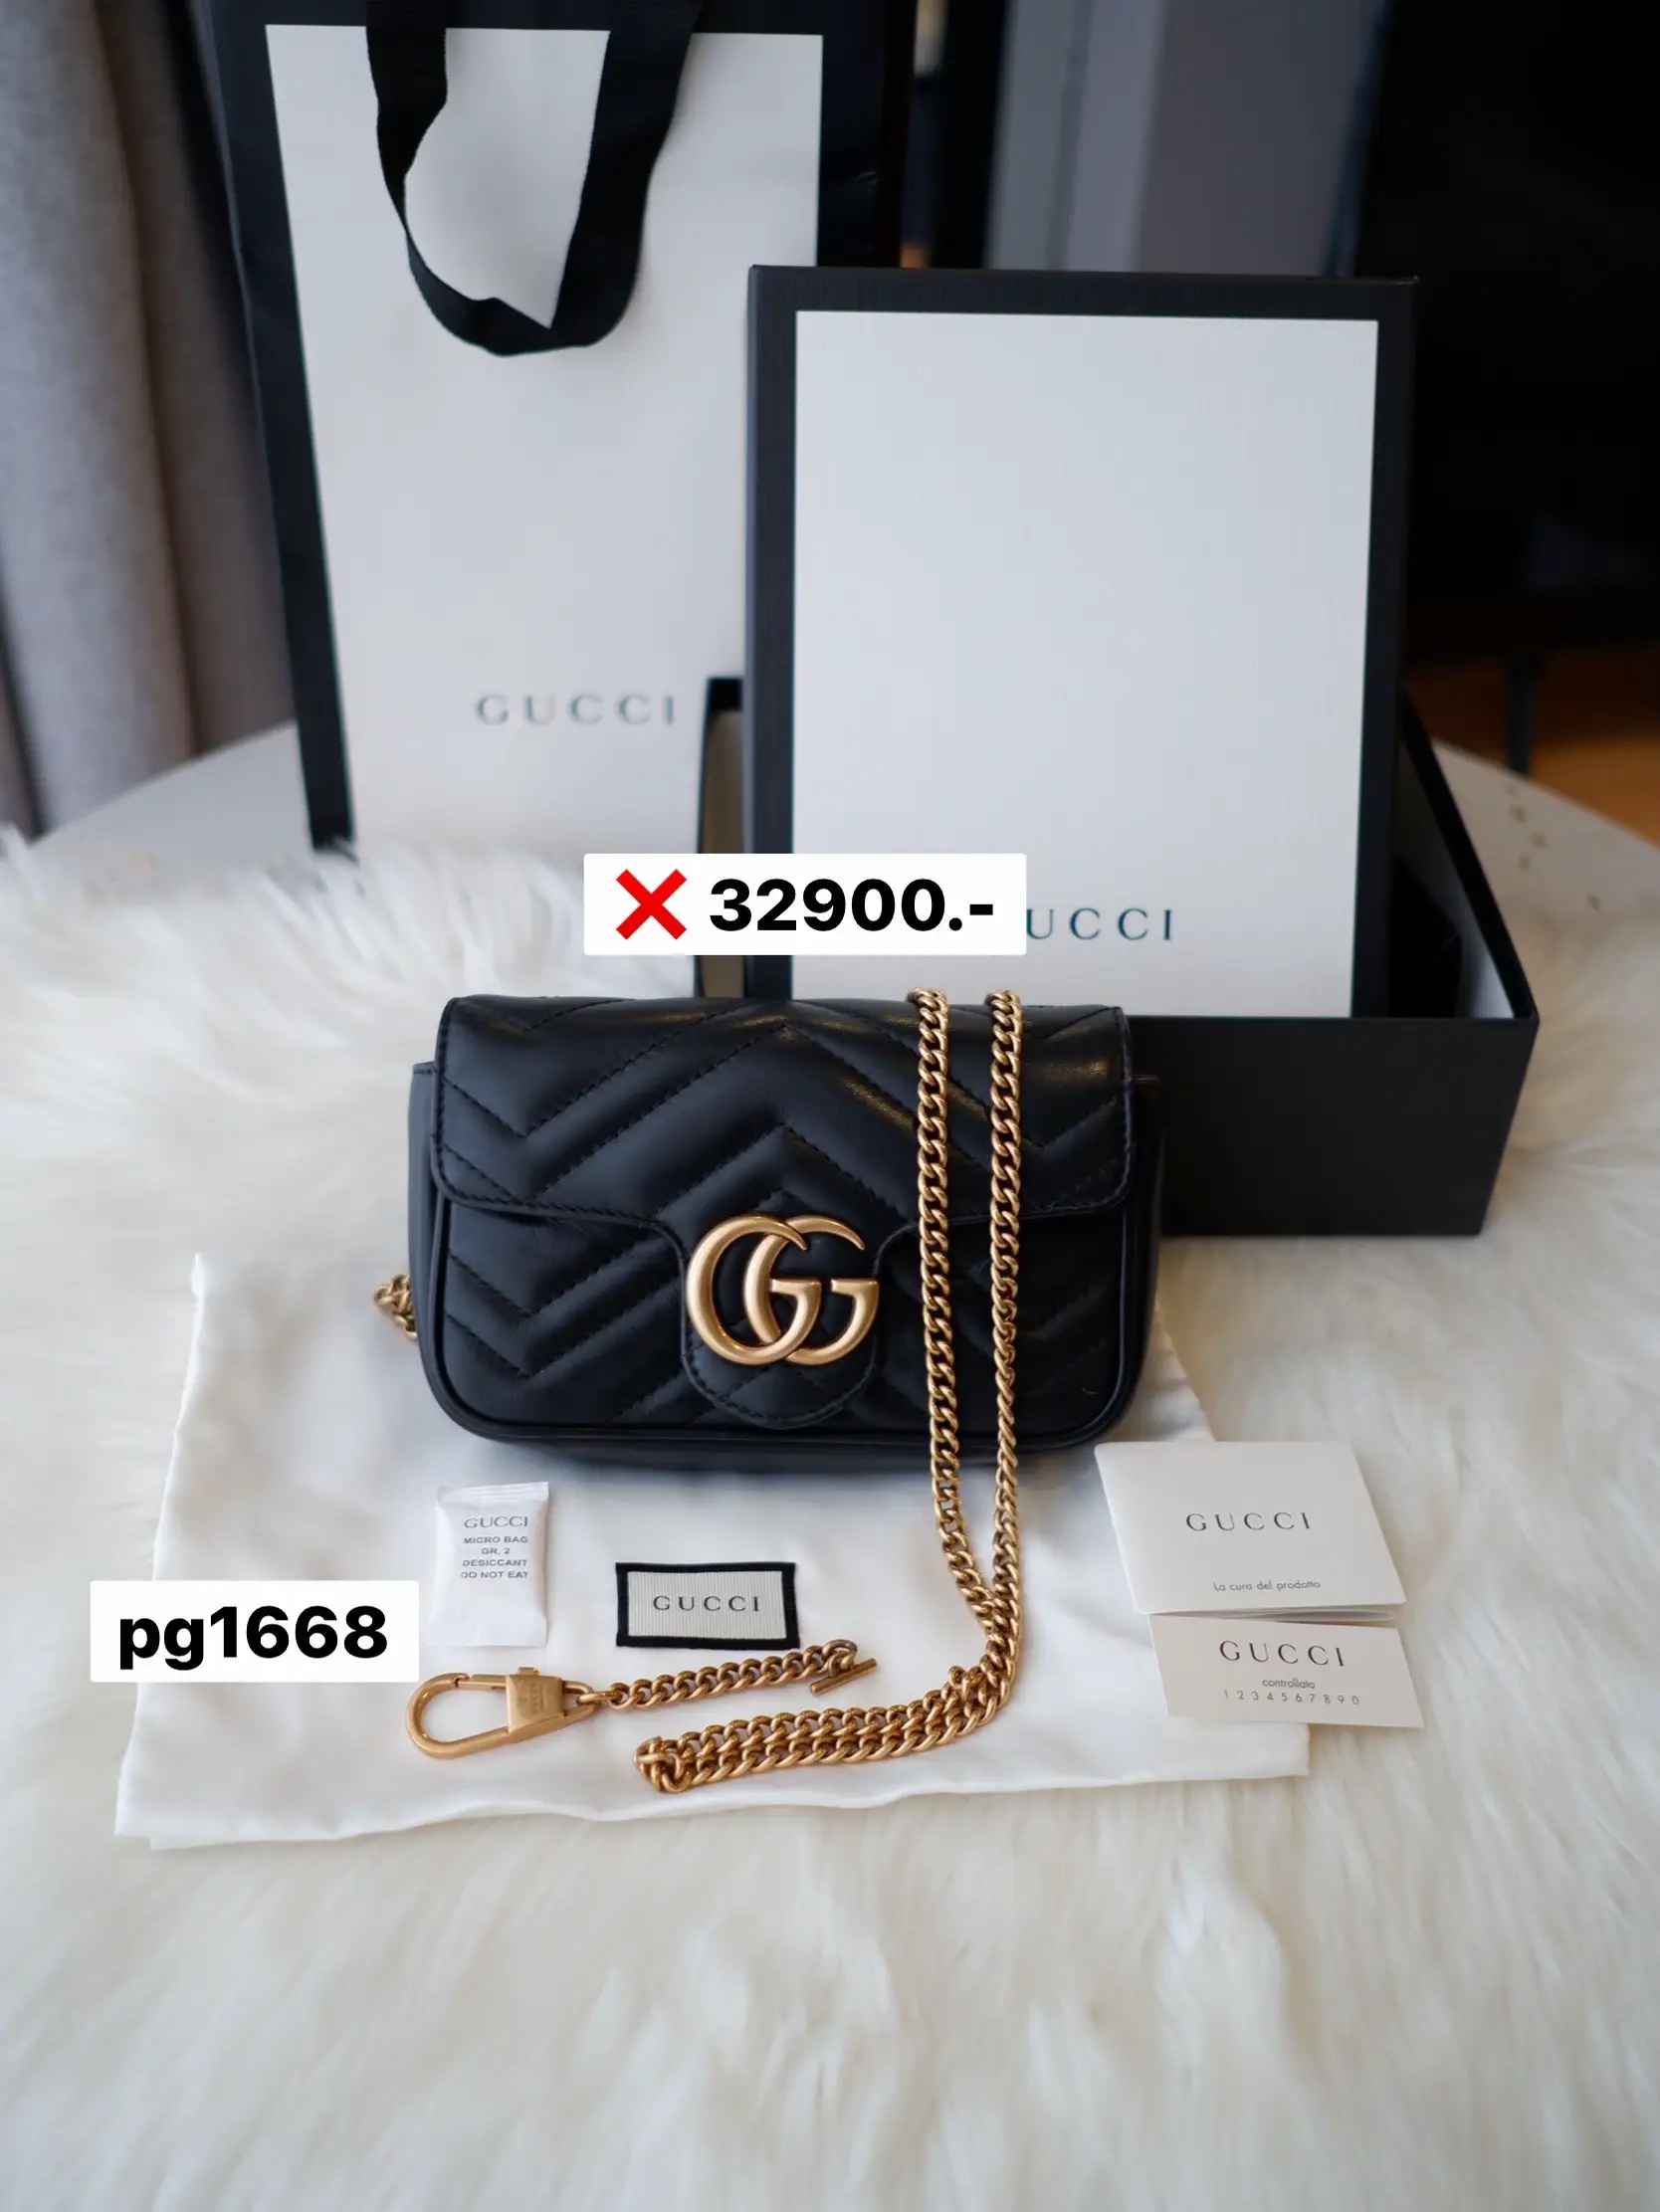 Gucci Marmont Mini Bag Review, Gallery posted by Maxxy Hayes